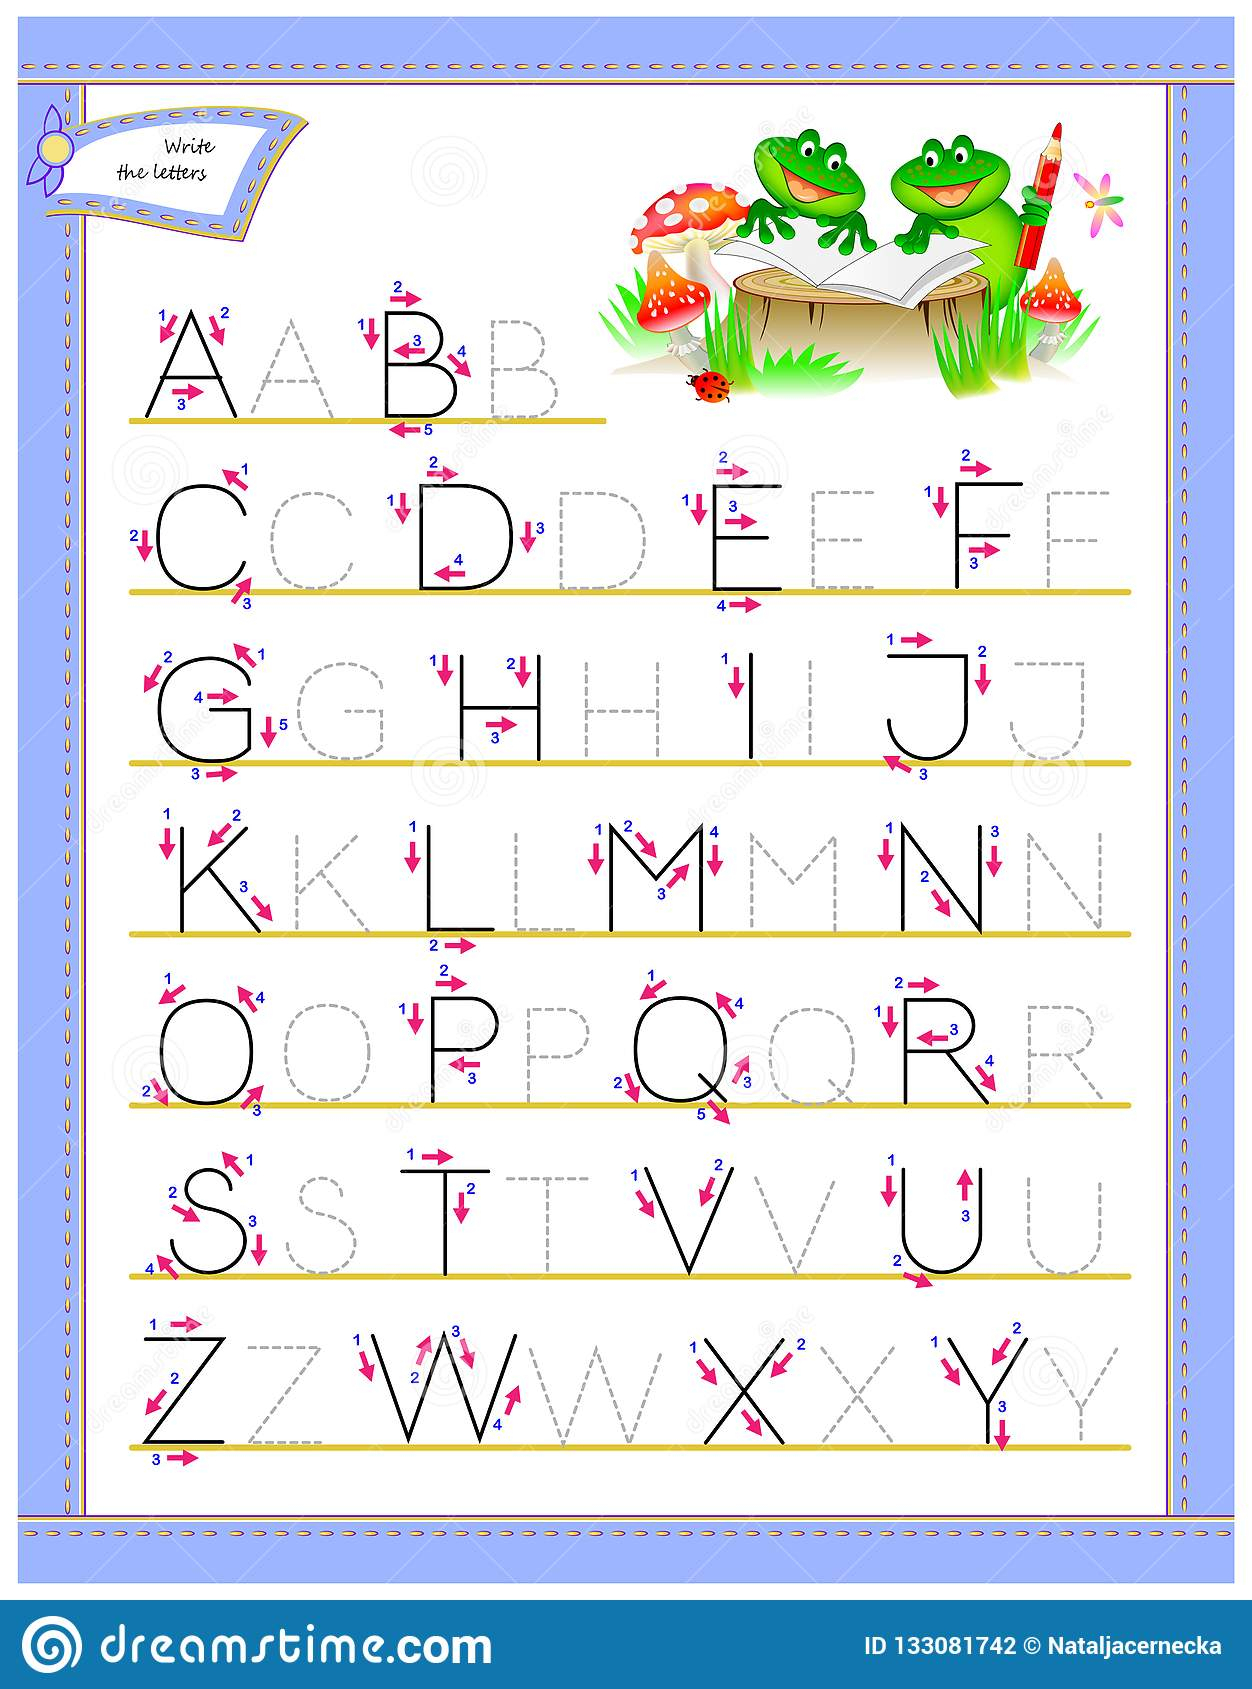 Tracing Abc Letters For Study English Alphabet. Worksheet regarding Tracing Alphabet Letters